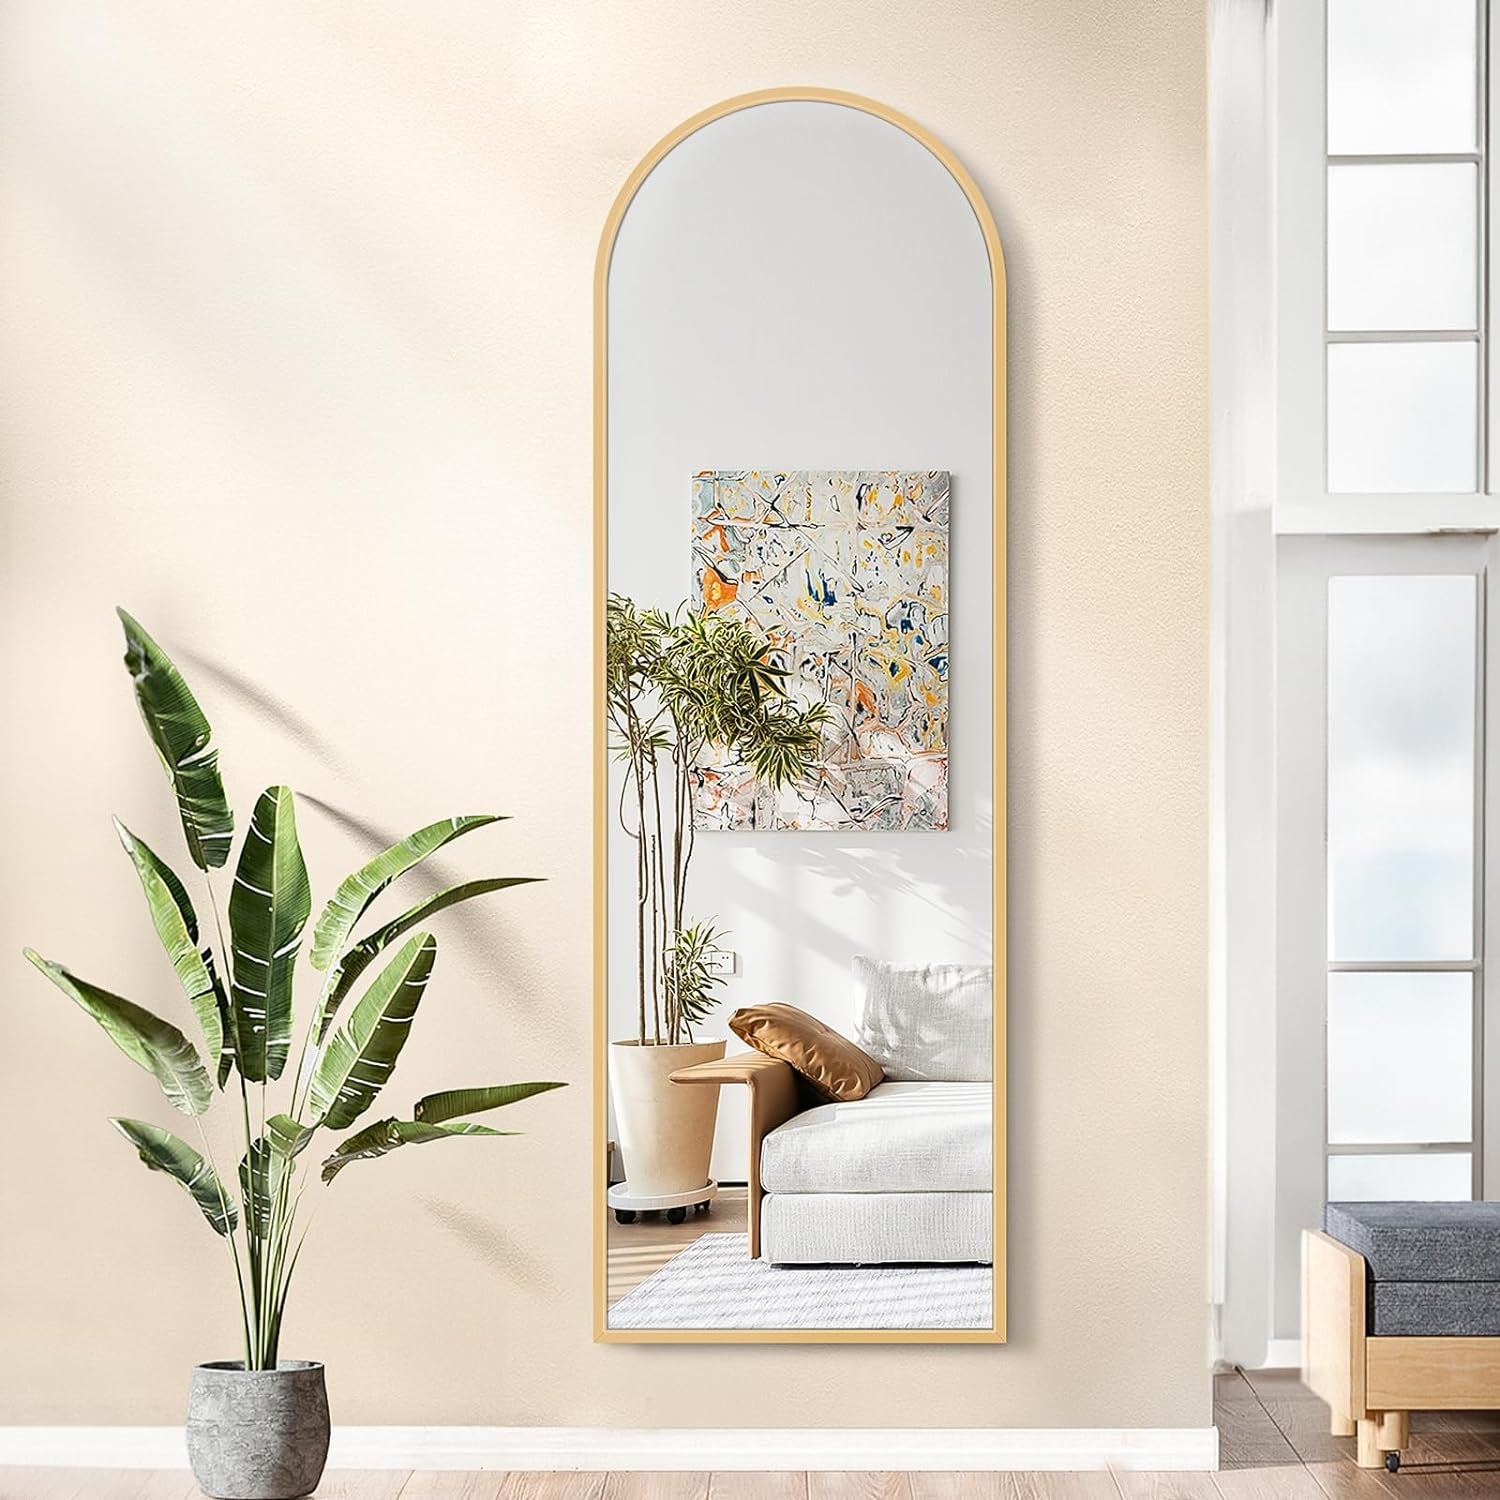 Arched Full Length Mirror,64"X21" Floor Mirror, Mirror Full Length Standing Hanging or Leaning against Wall, Freestanding Full Body Mirror, Wall Mounted Mirror with Thin Aluminum Frame (Gold) - Design By Technique